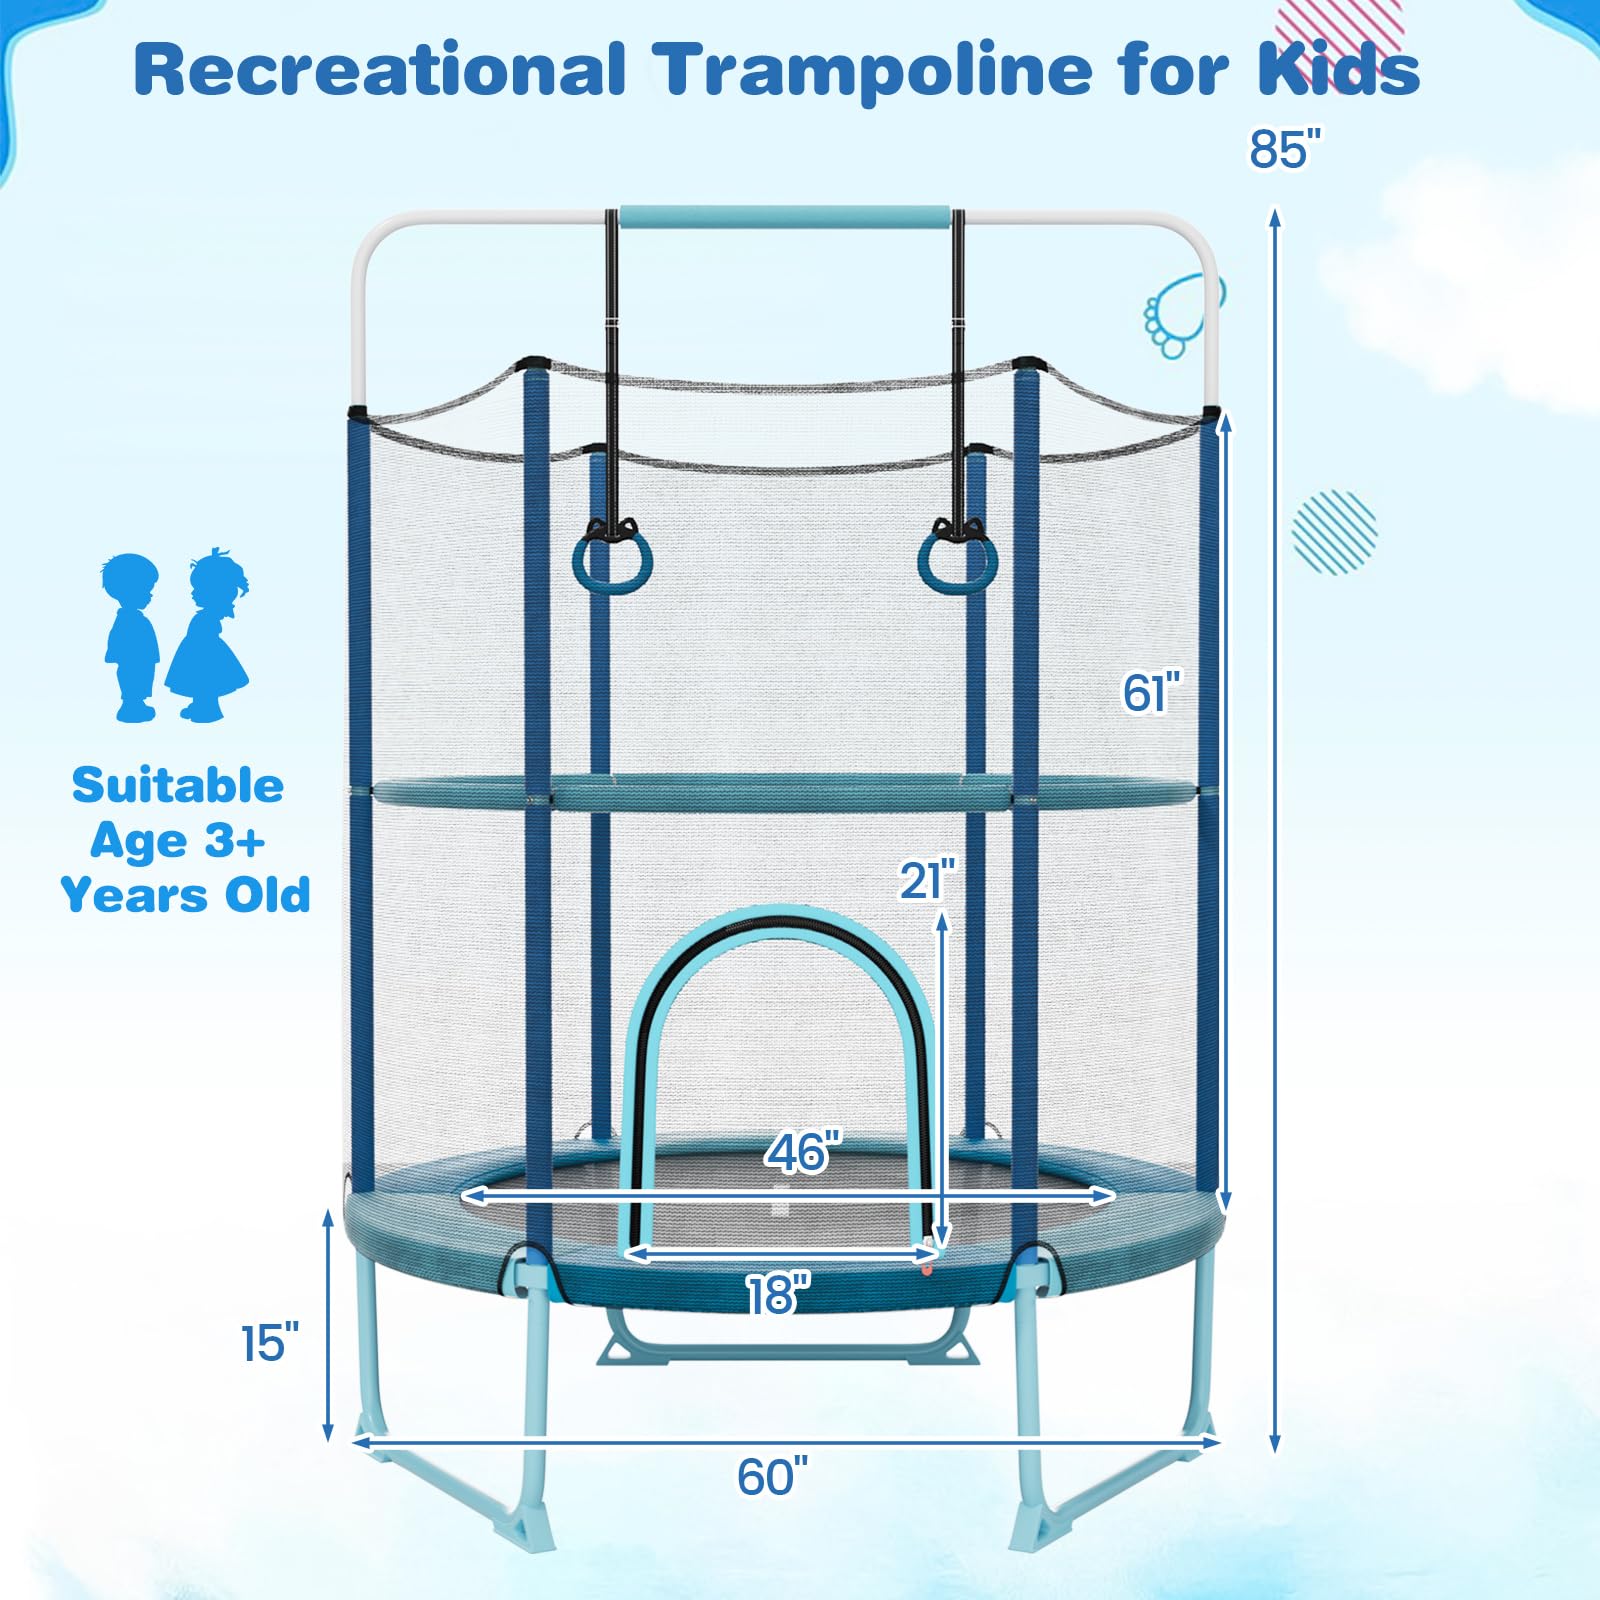 Giantex 60" Trampoline for Kids, 5 Ft Toddler Trampoline with Net, 85" Height Mini Trampoline with Detachable Ring and Horizontal Bar